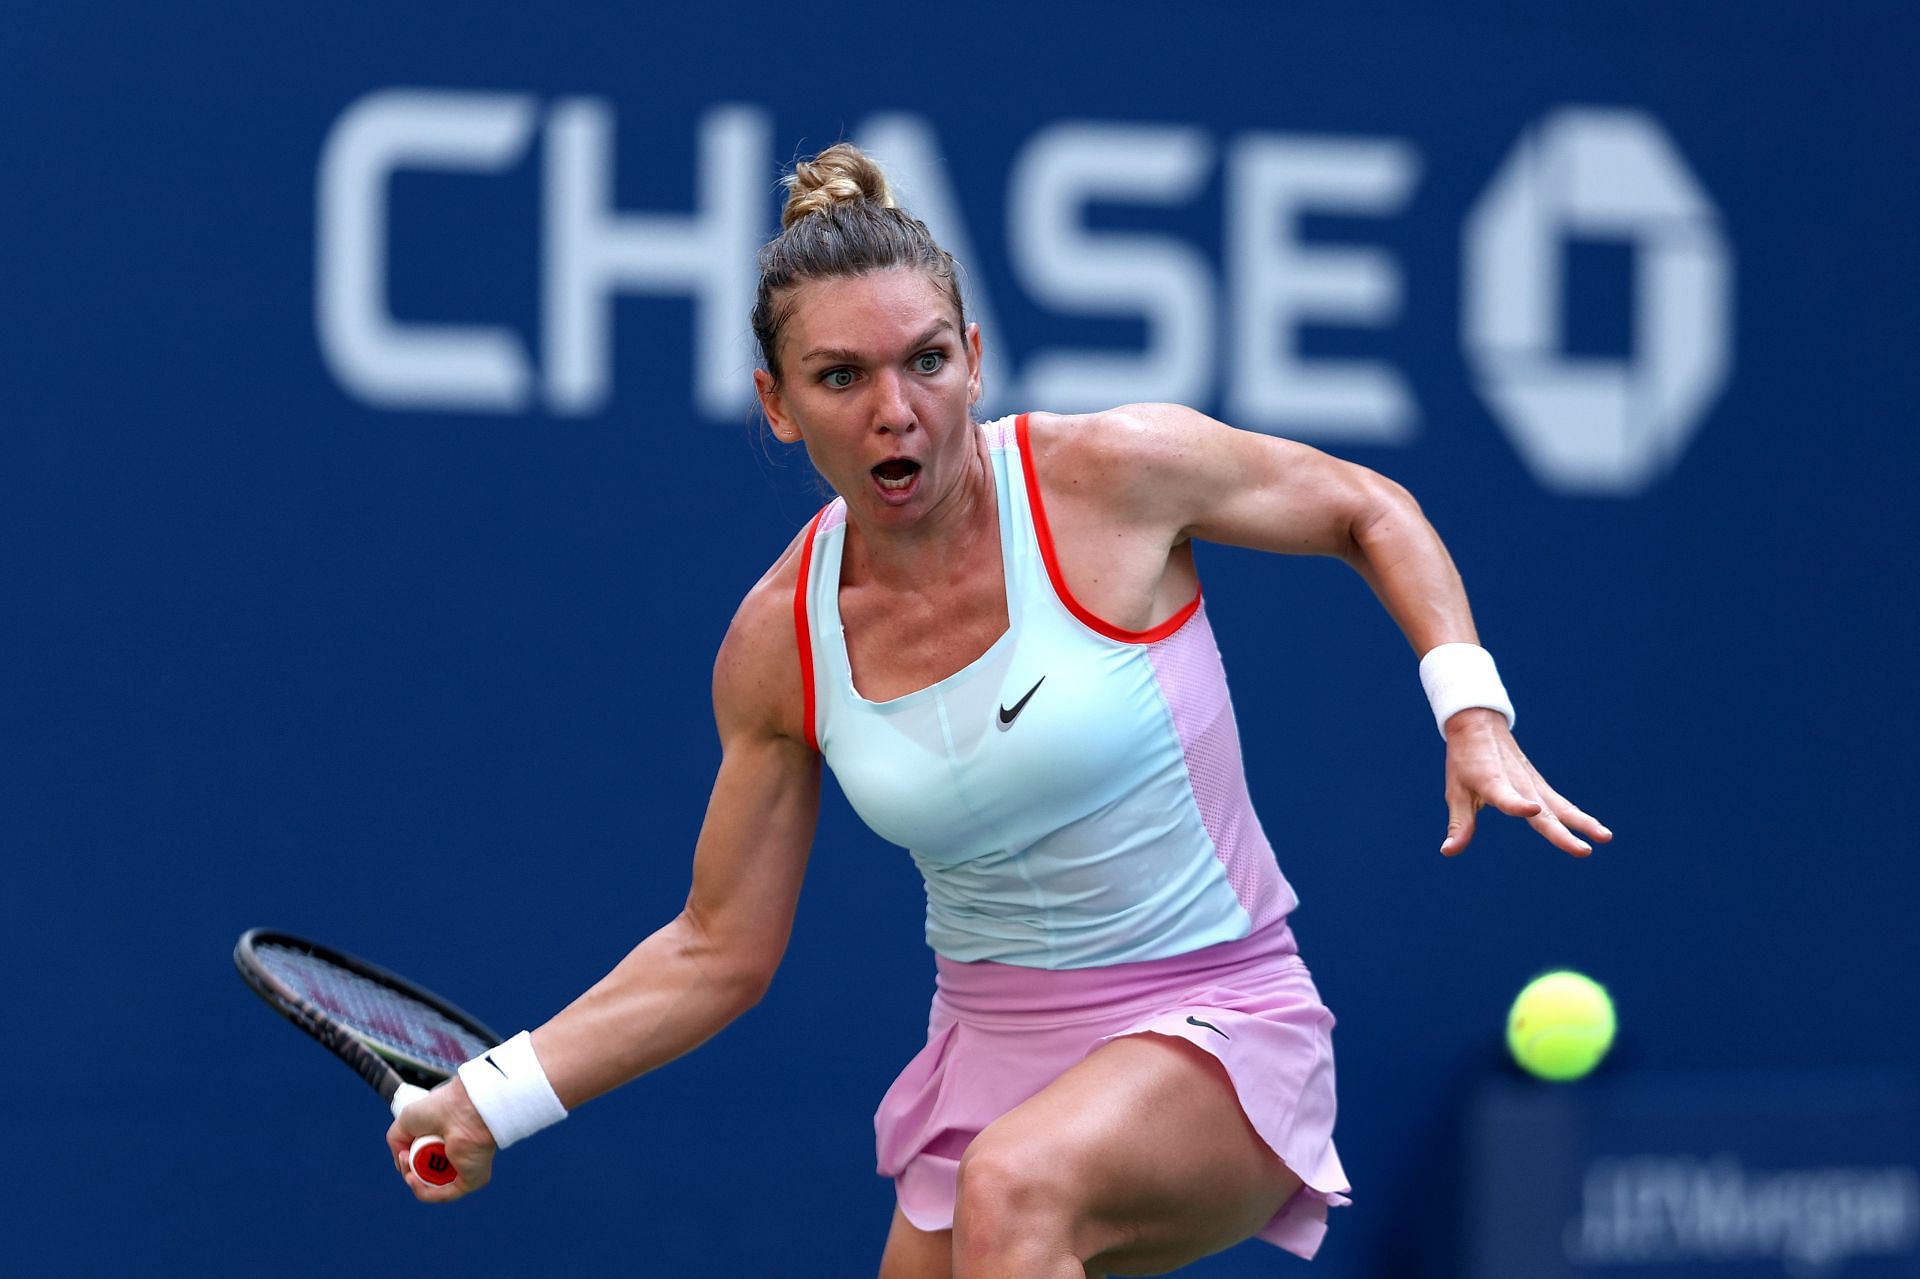 Simona Halep at the 2022 US Open